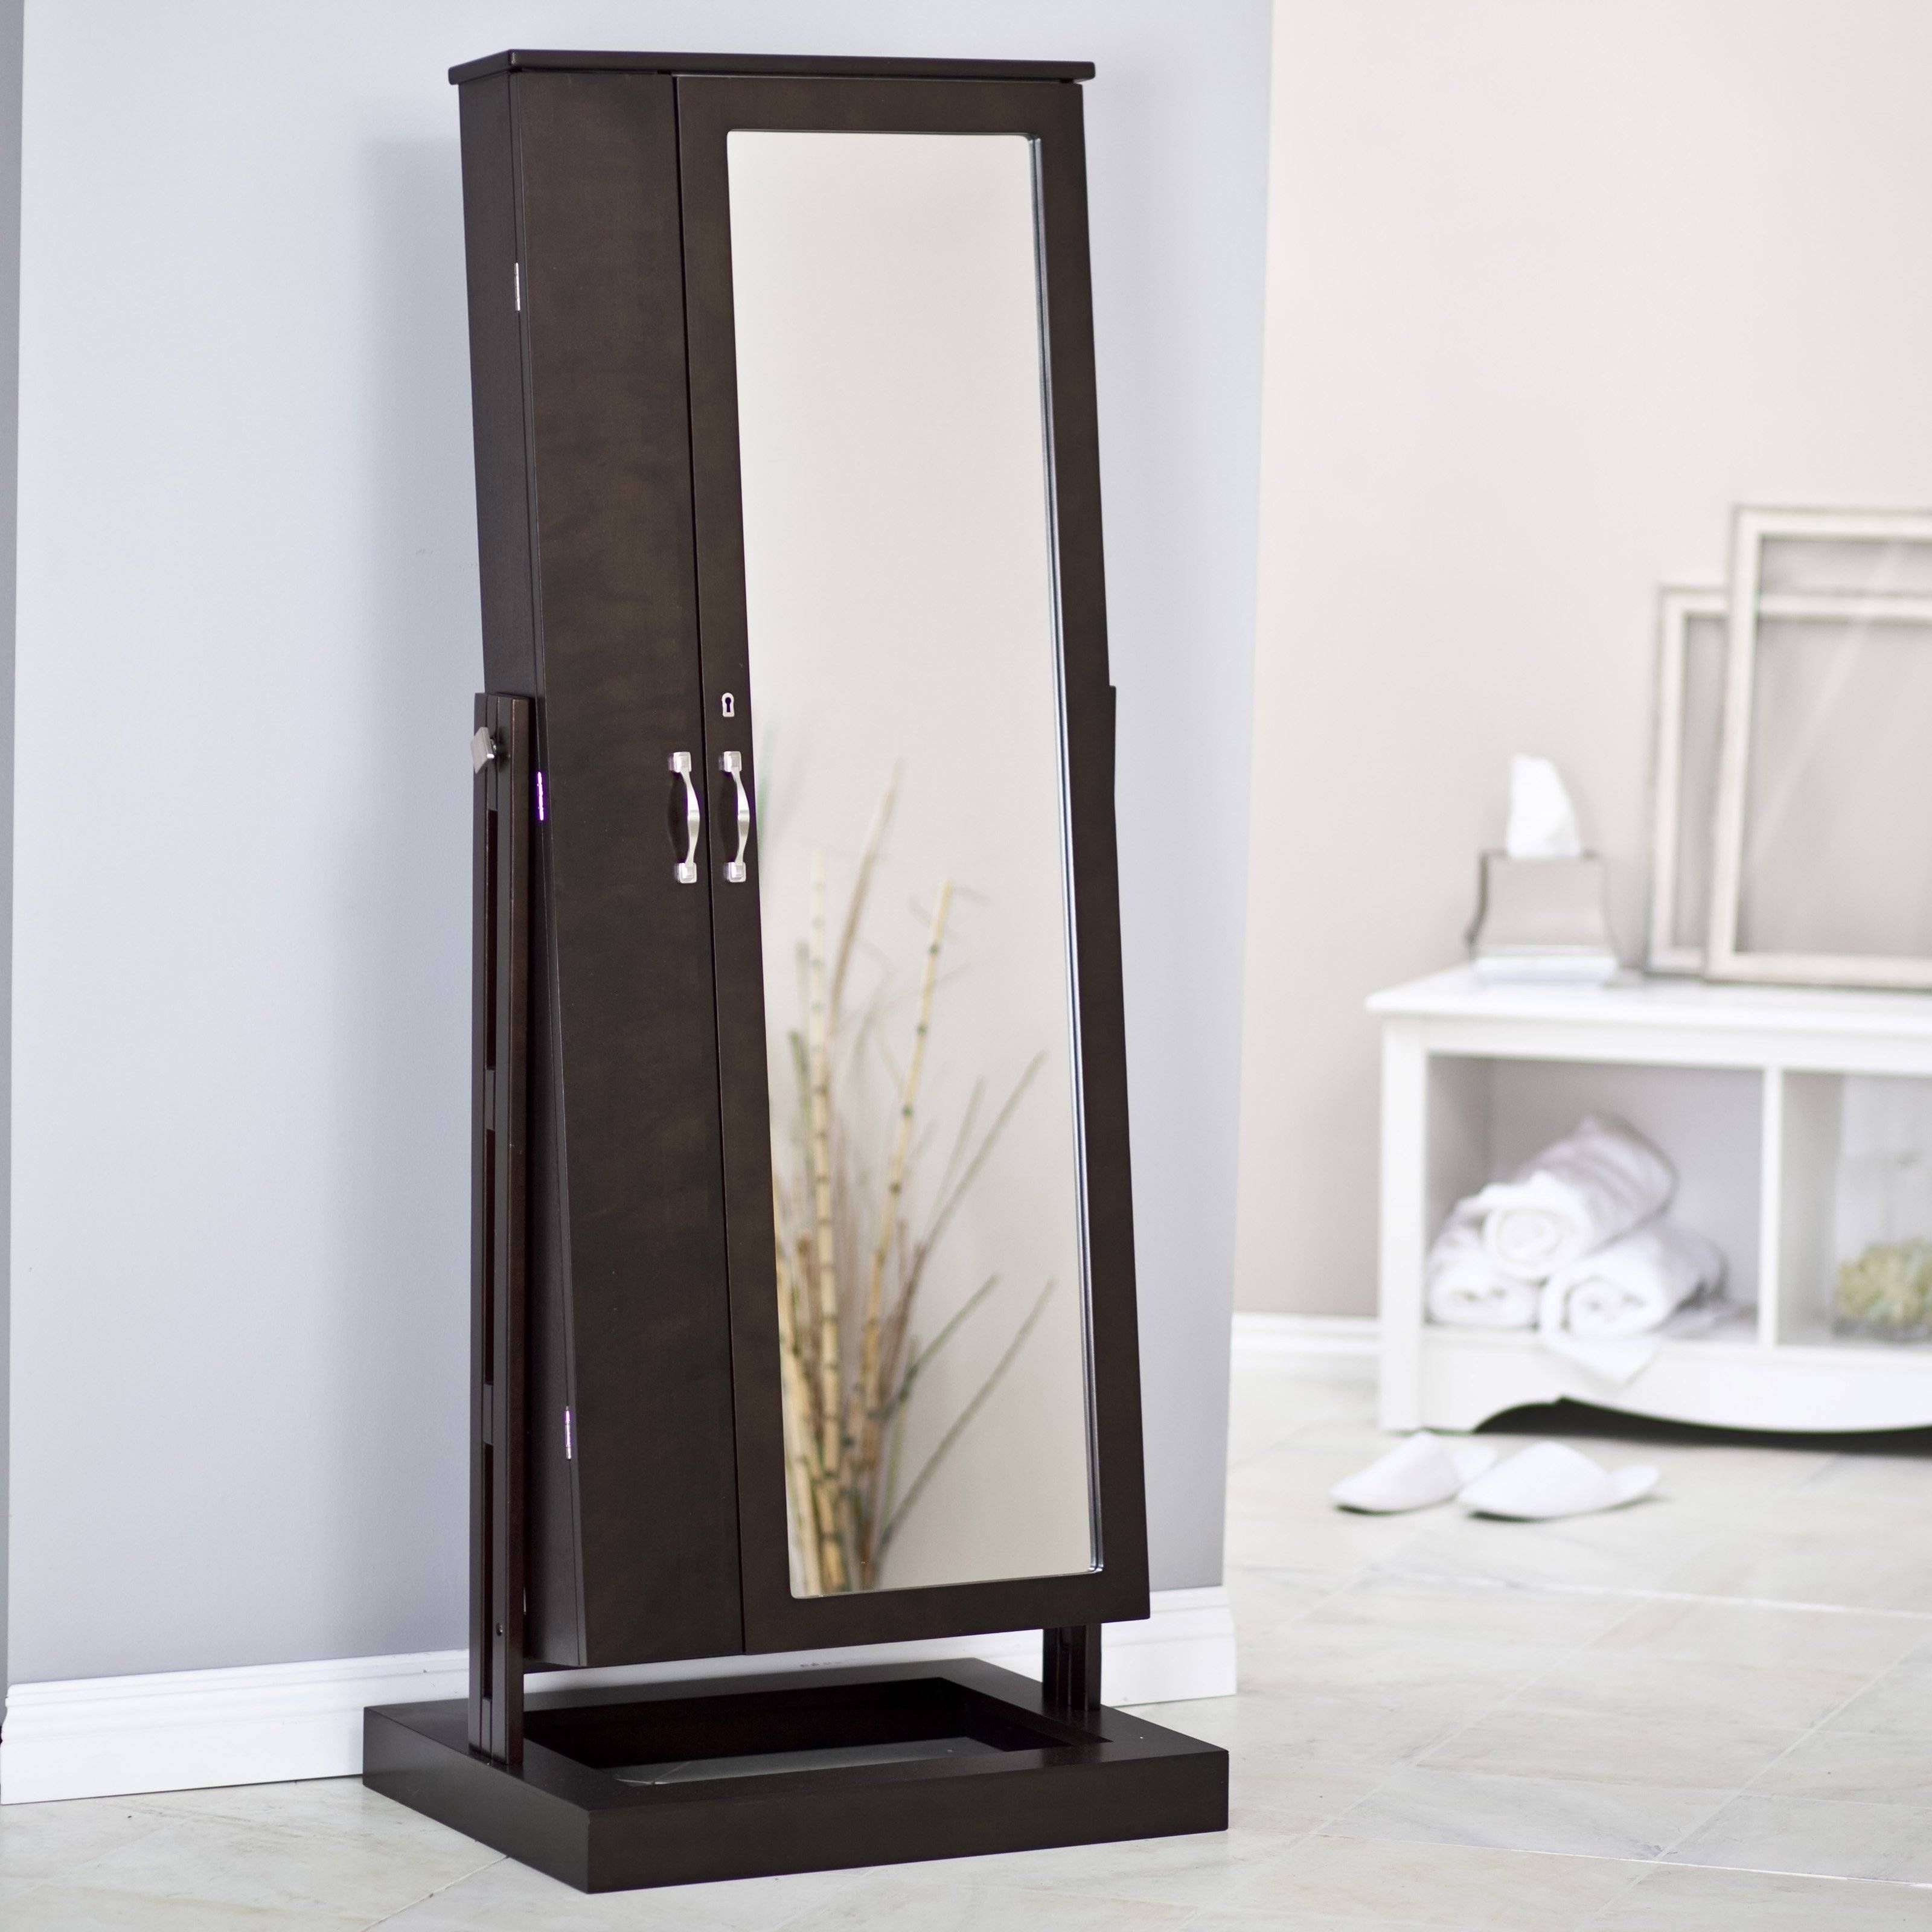 Decor: Stunning Heritage Jewelry Armoire Walmart Cheval Mirror Pertaining To Full Length Free Standing Mirrors With Drawer (View 15 of 25)